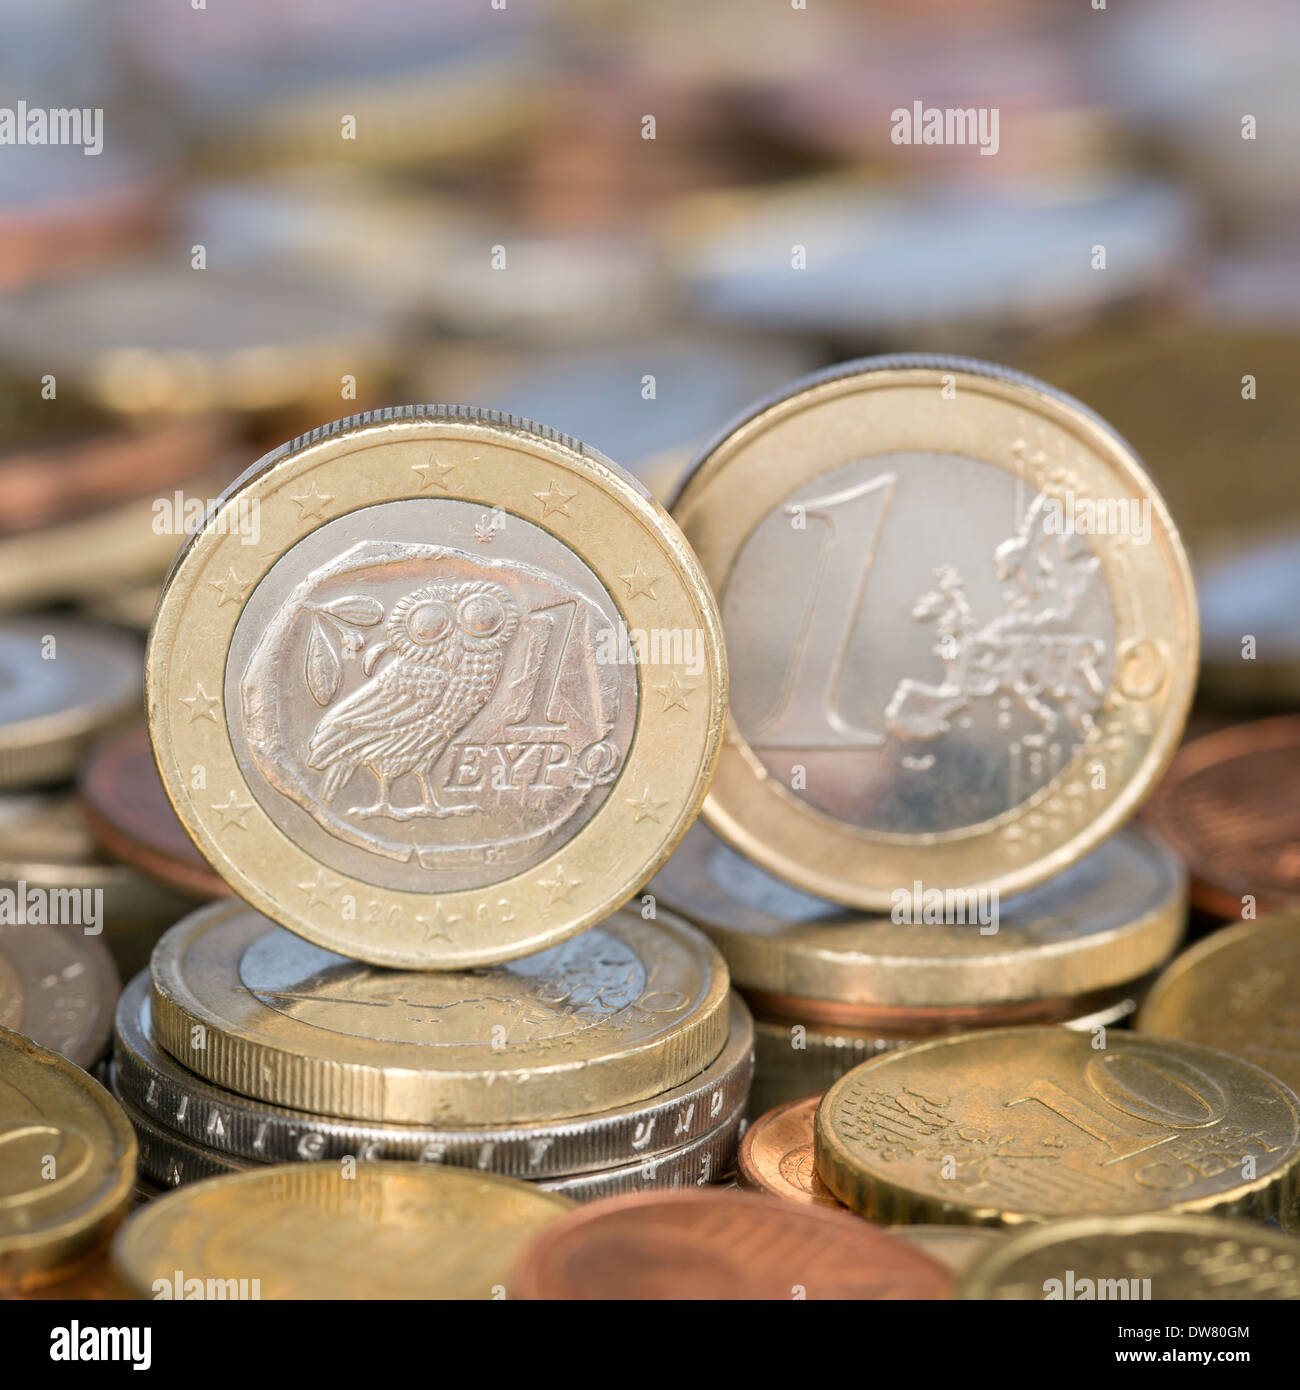 A one Euro coin from the European Union currency member country Greece Stock Photo